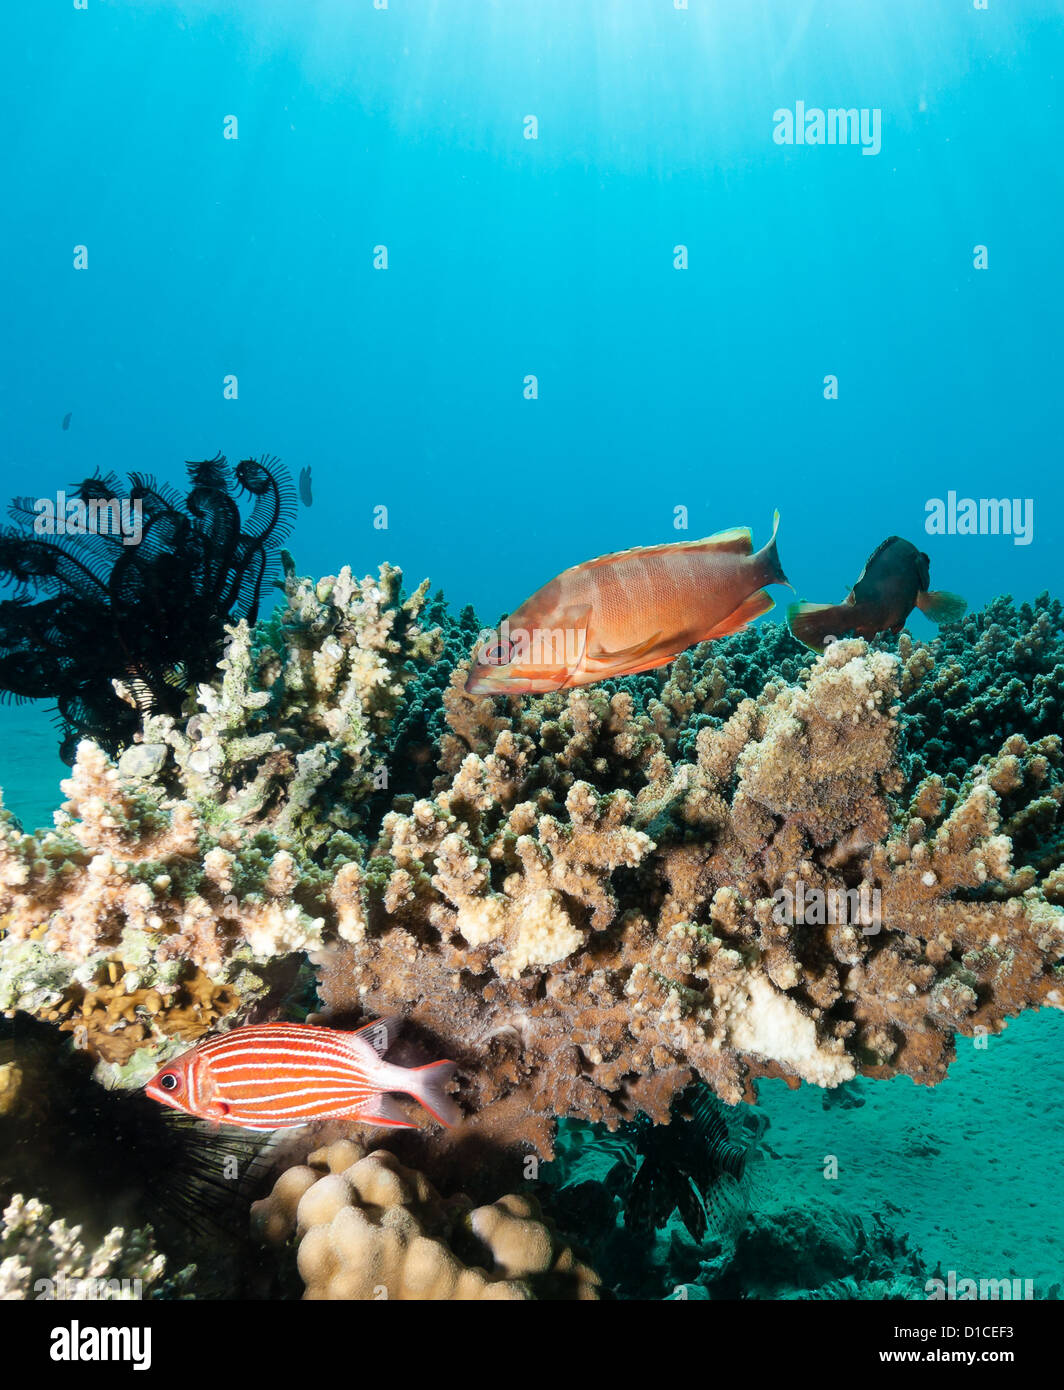 Grouper and other fish swim around a table coral Stock Photo